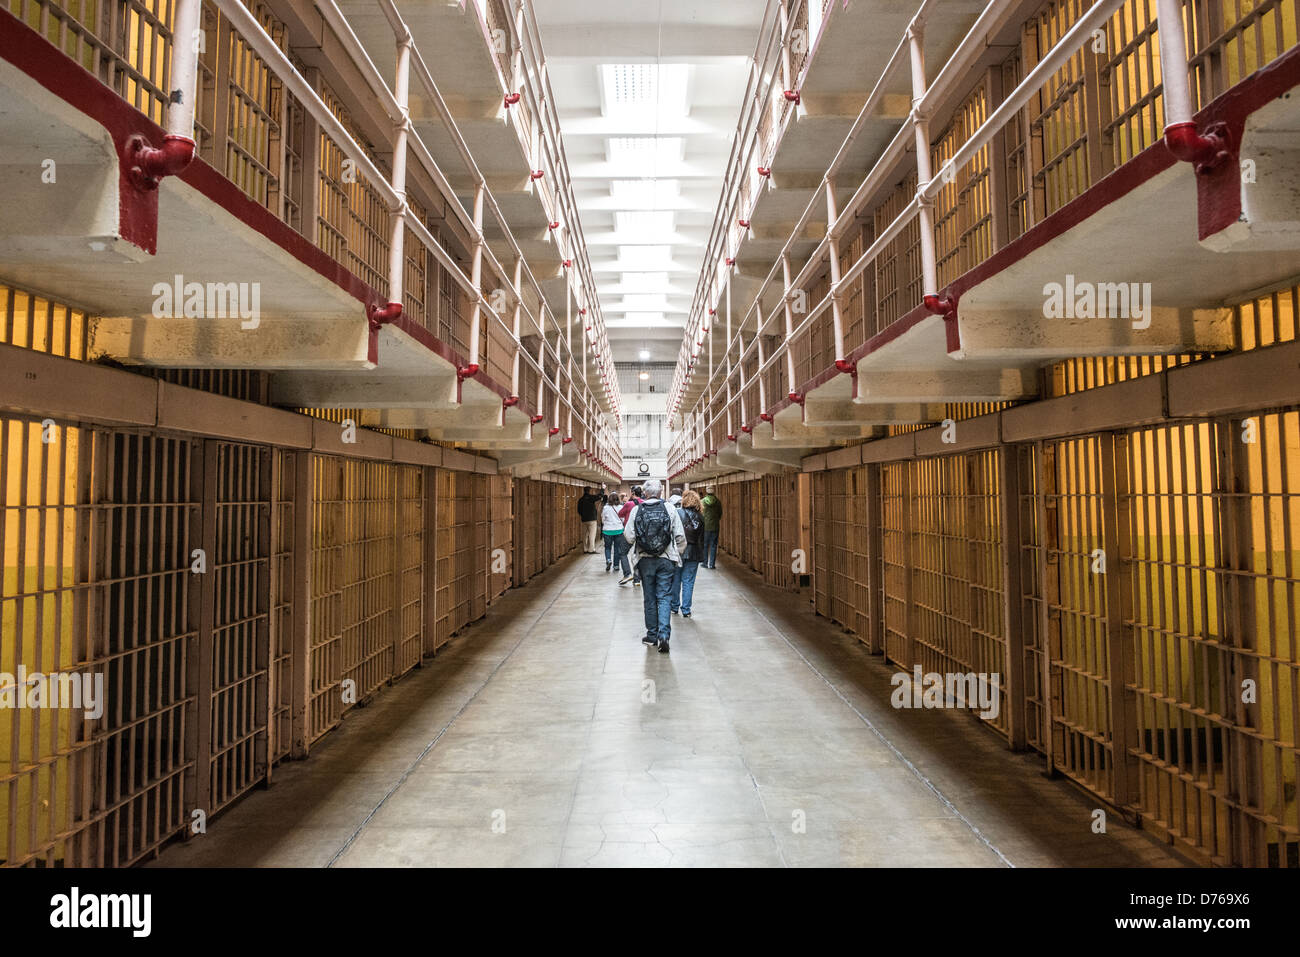 SAN FRANCISCO, California - Inside the cell block where the inmate's cells were in Alcatraz prison on Alcatraz Island in San Francisco Bay. Stock Photo